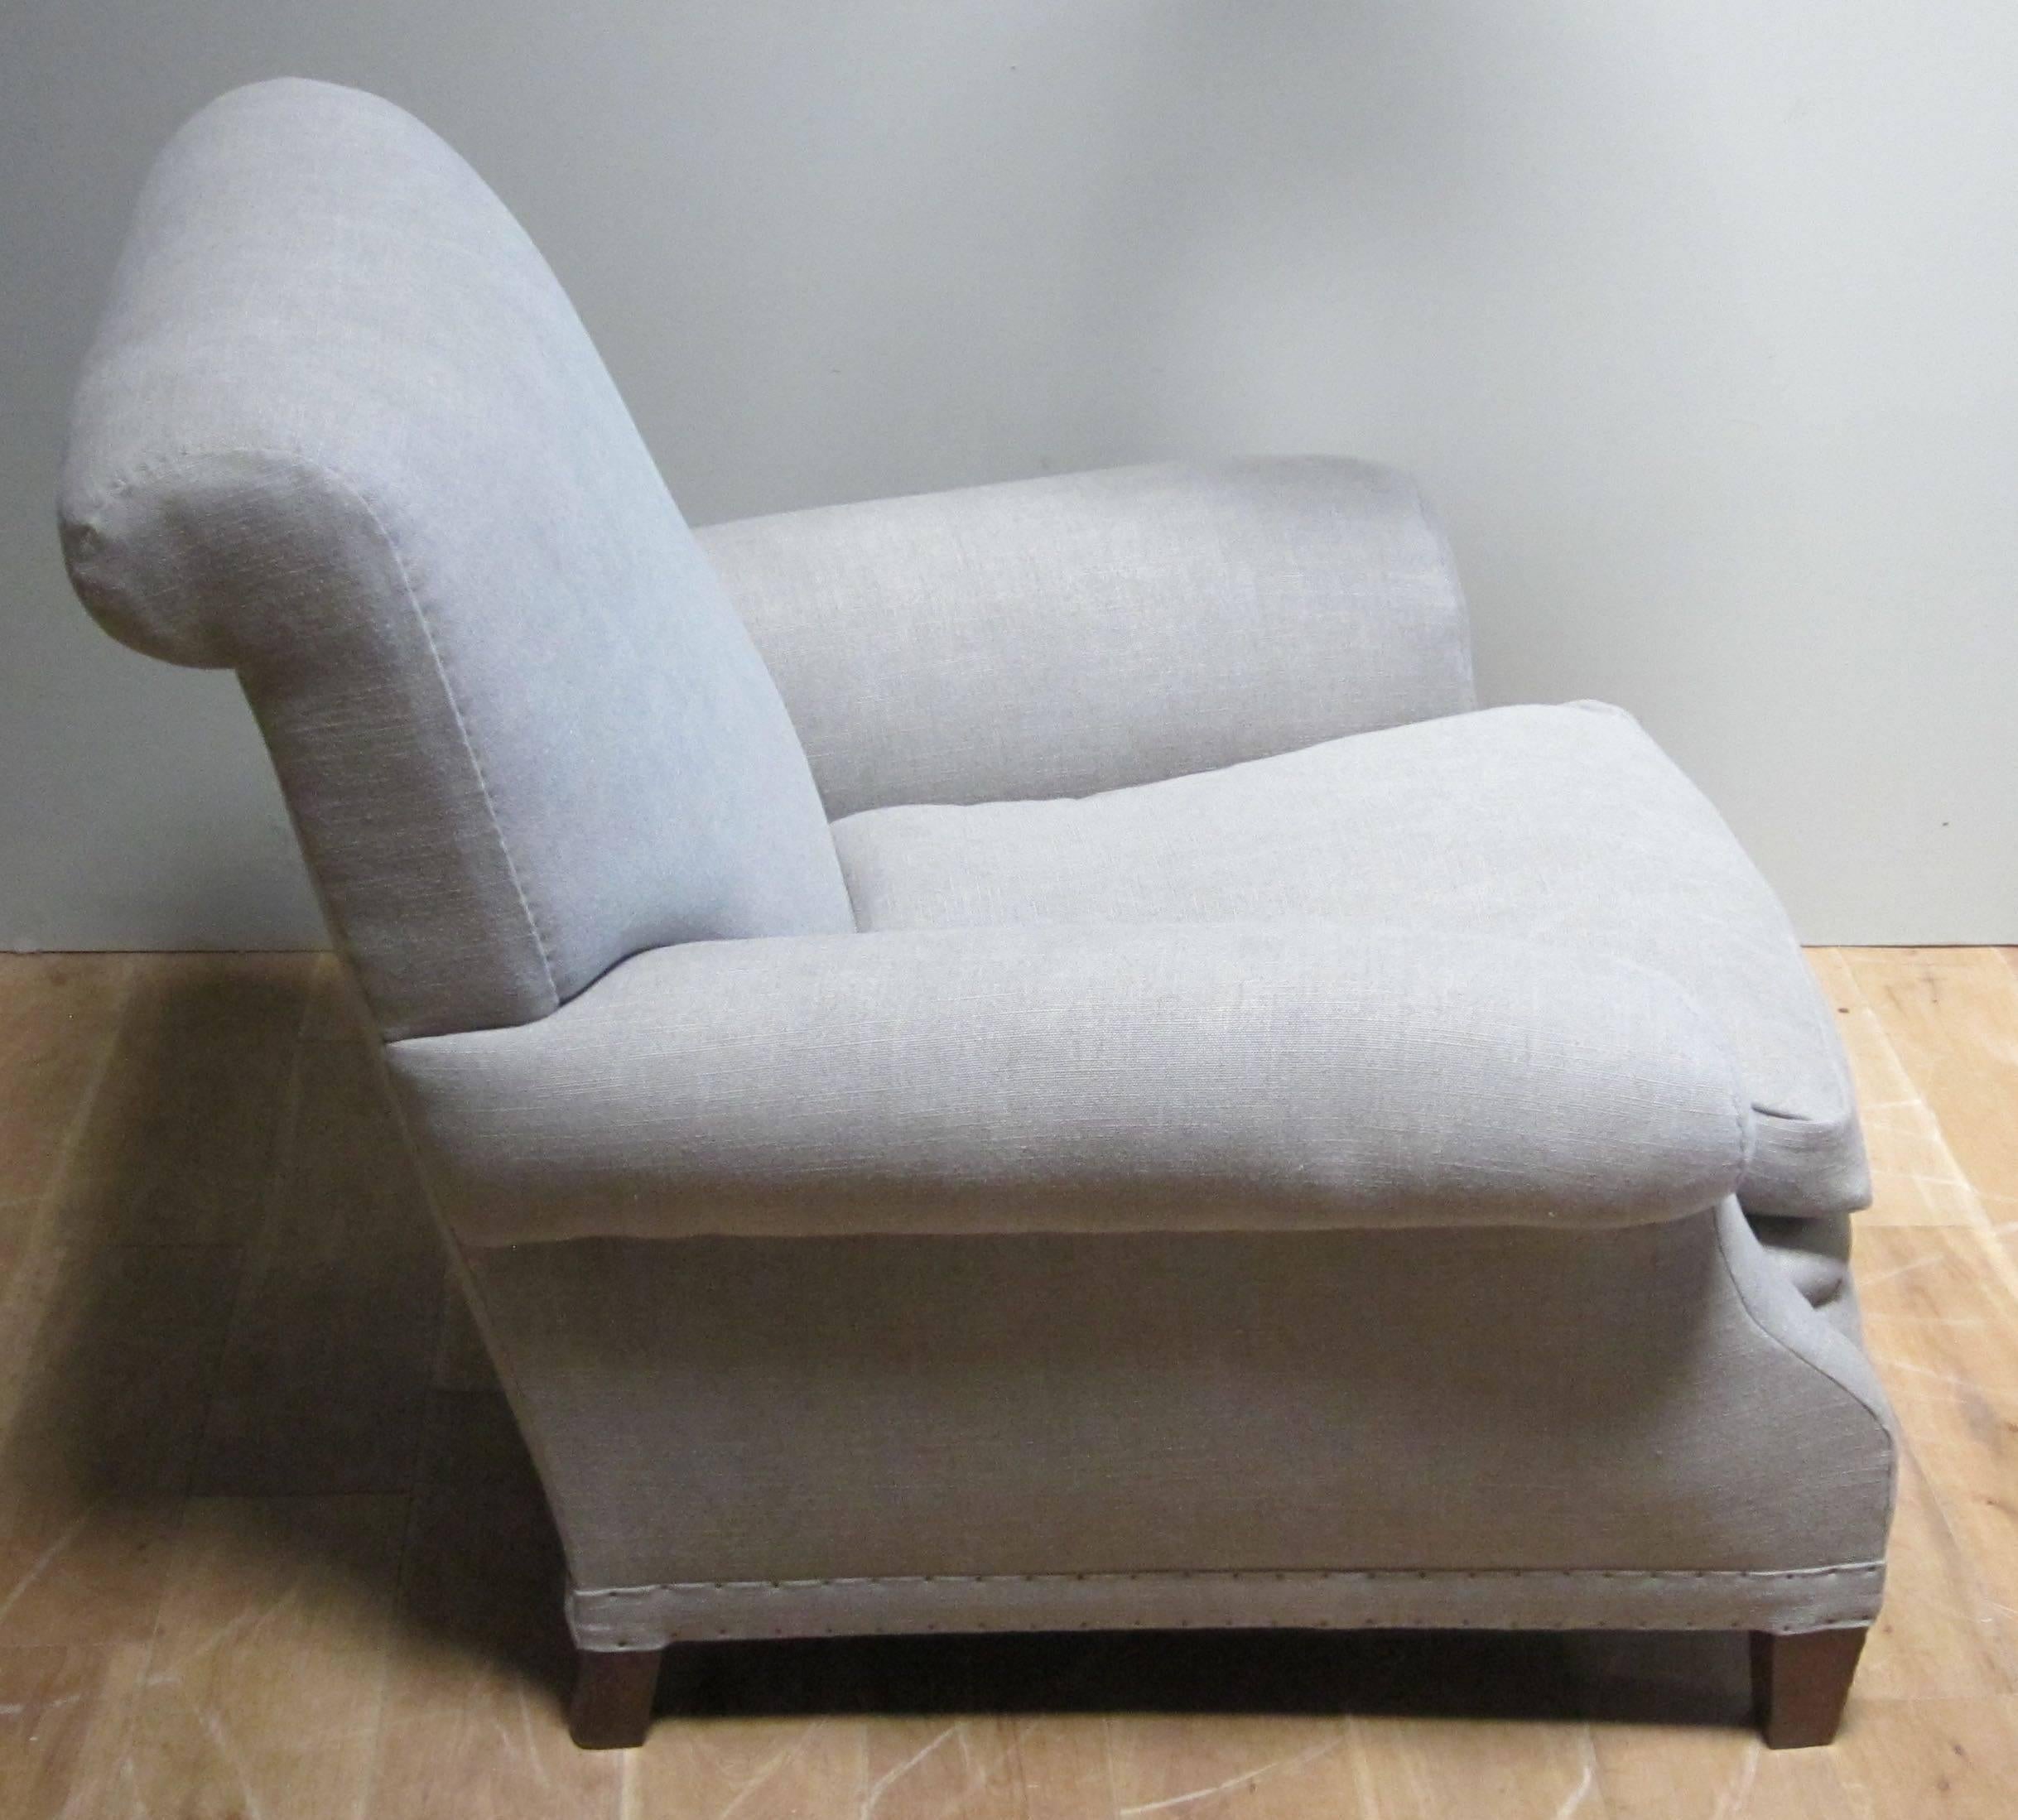 1920s English pair of club chairs.
Recently reupholstered in light grey linen.
Separate seat cushion is down and feather filled.
Note the curved back and arms.
Nailhead detailing at the bottom of the chair.
Very comfortable and in excellent